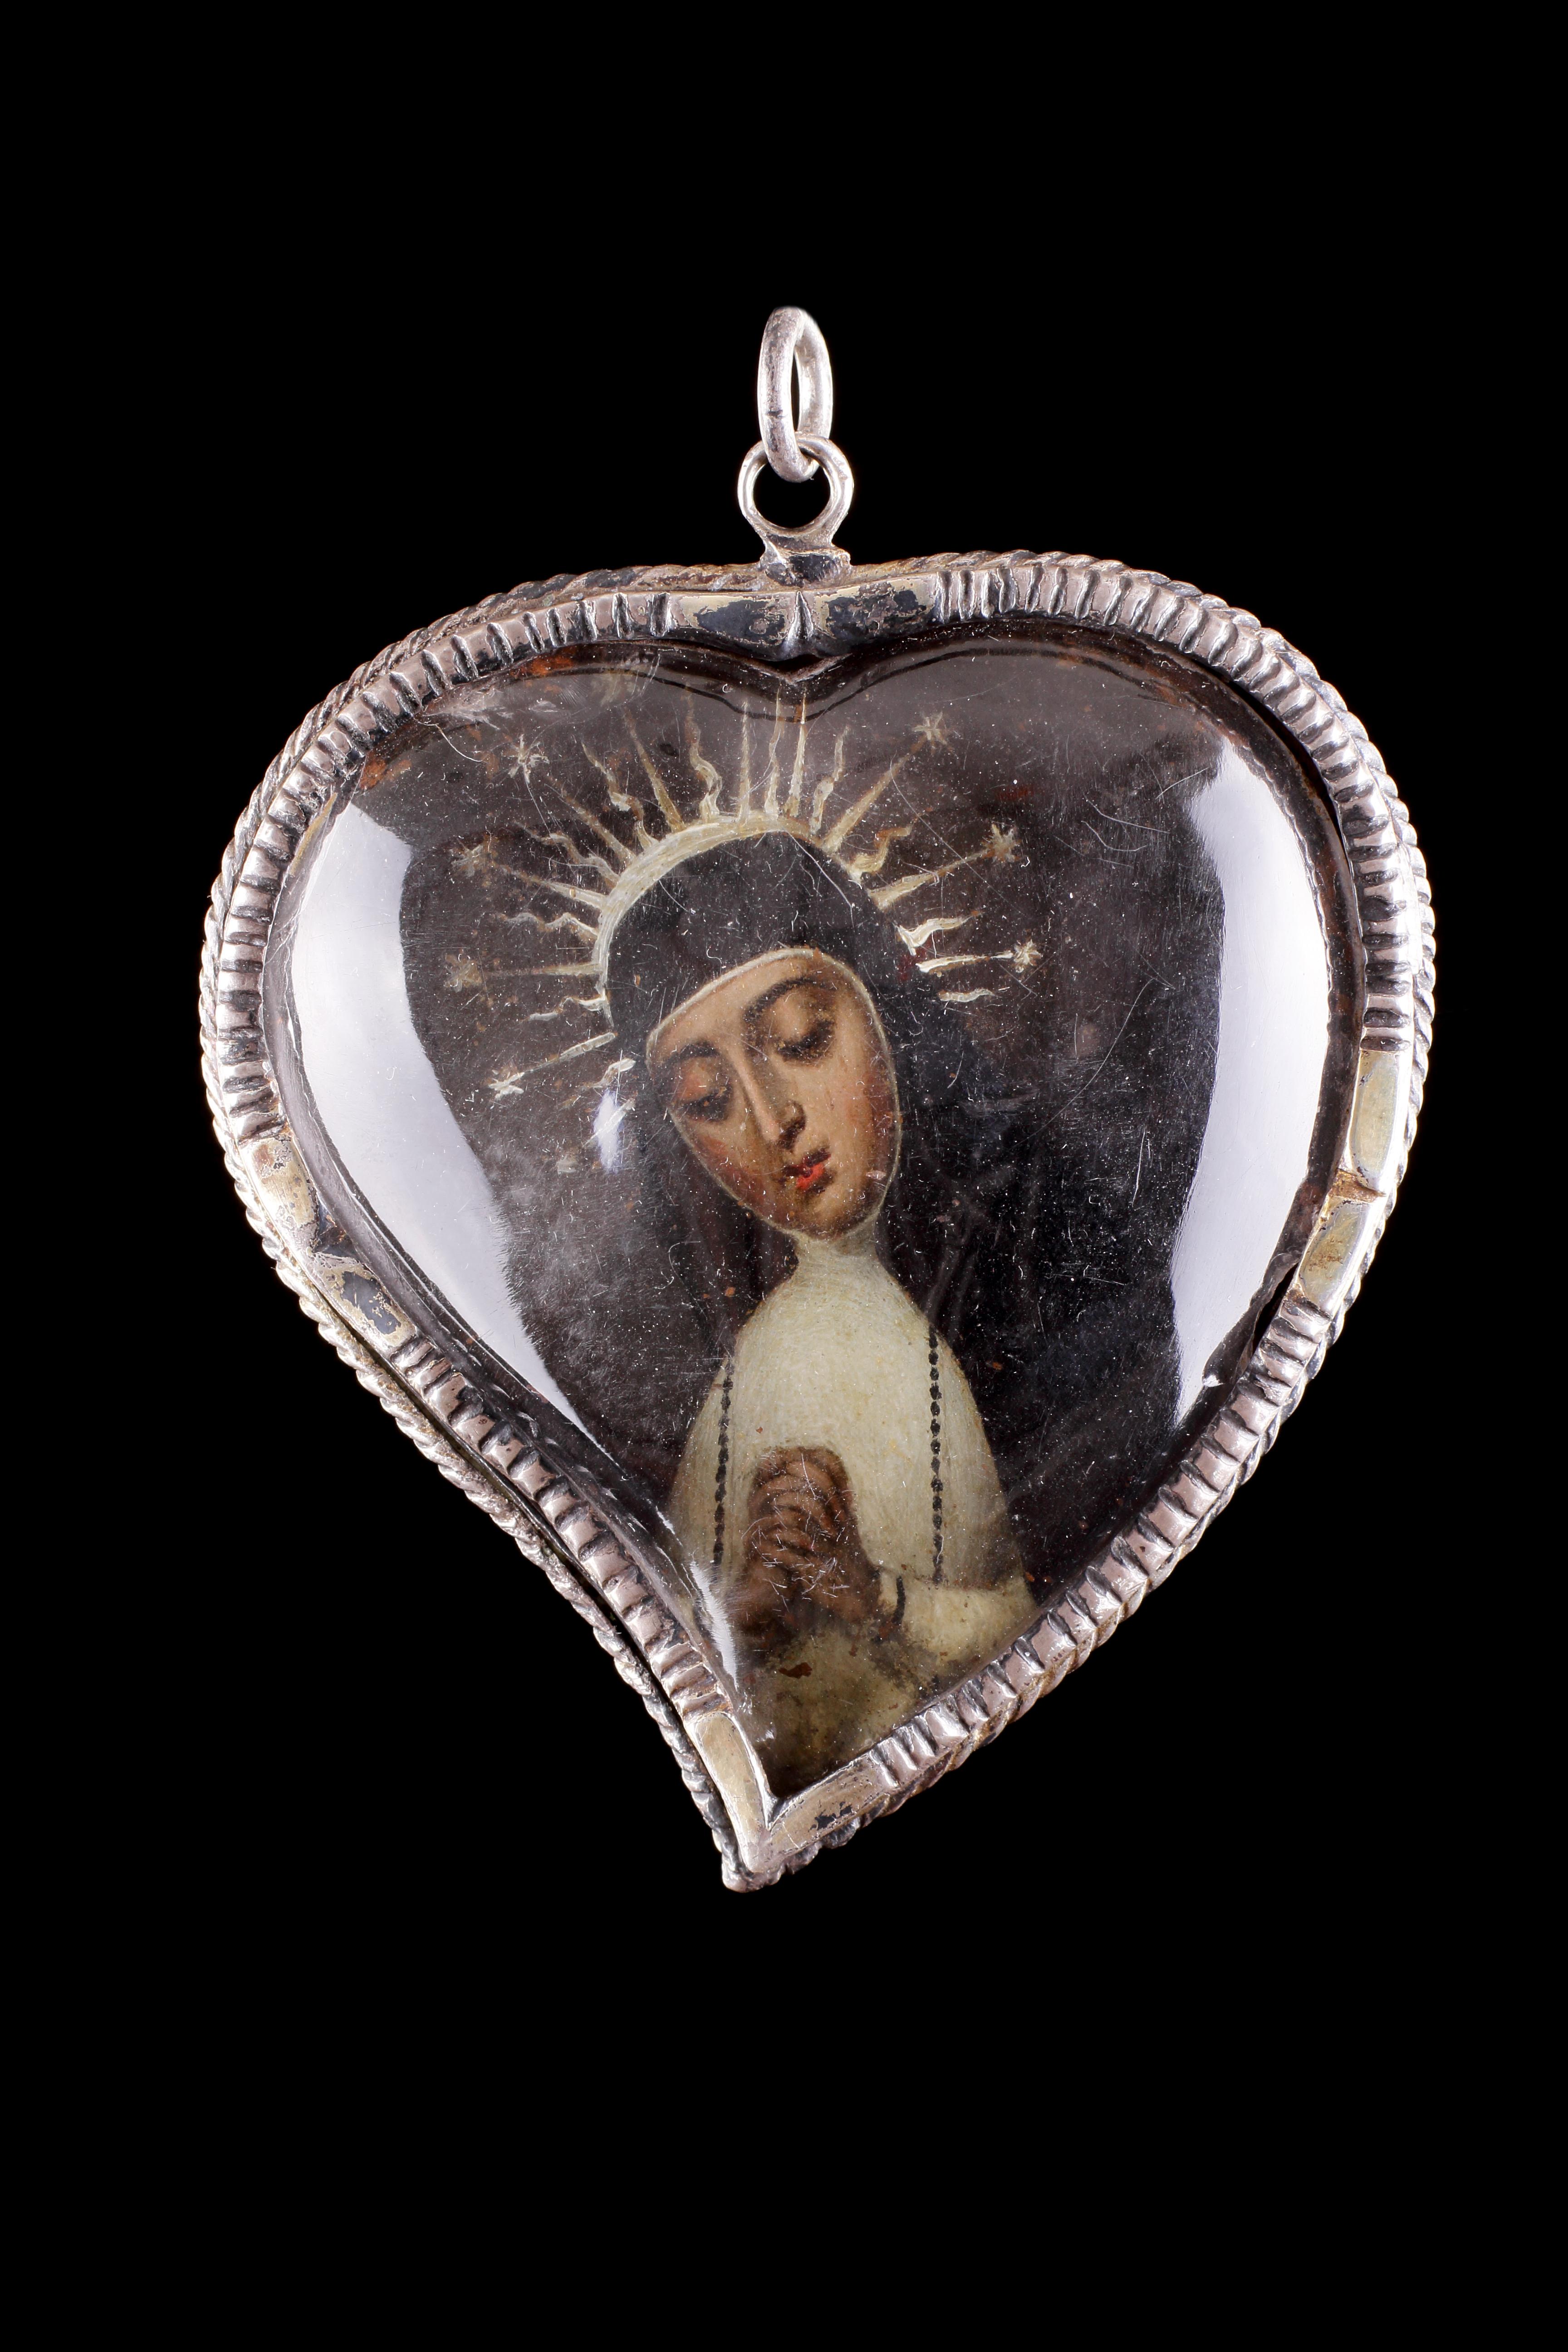 A Large Heart Shaped Rock Crystal Silver Mounted Reliquary
Silver, Rock-Crystal, Polychrome 
Spain 
17th Century 

SIZE: 9cm high, 7.5cm wide, 1.5cm deep - 3½ ins high, 3 ins wide, ⅔ ins deep 